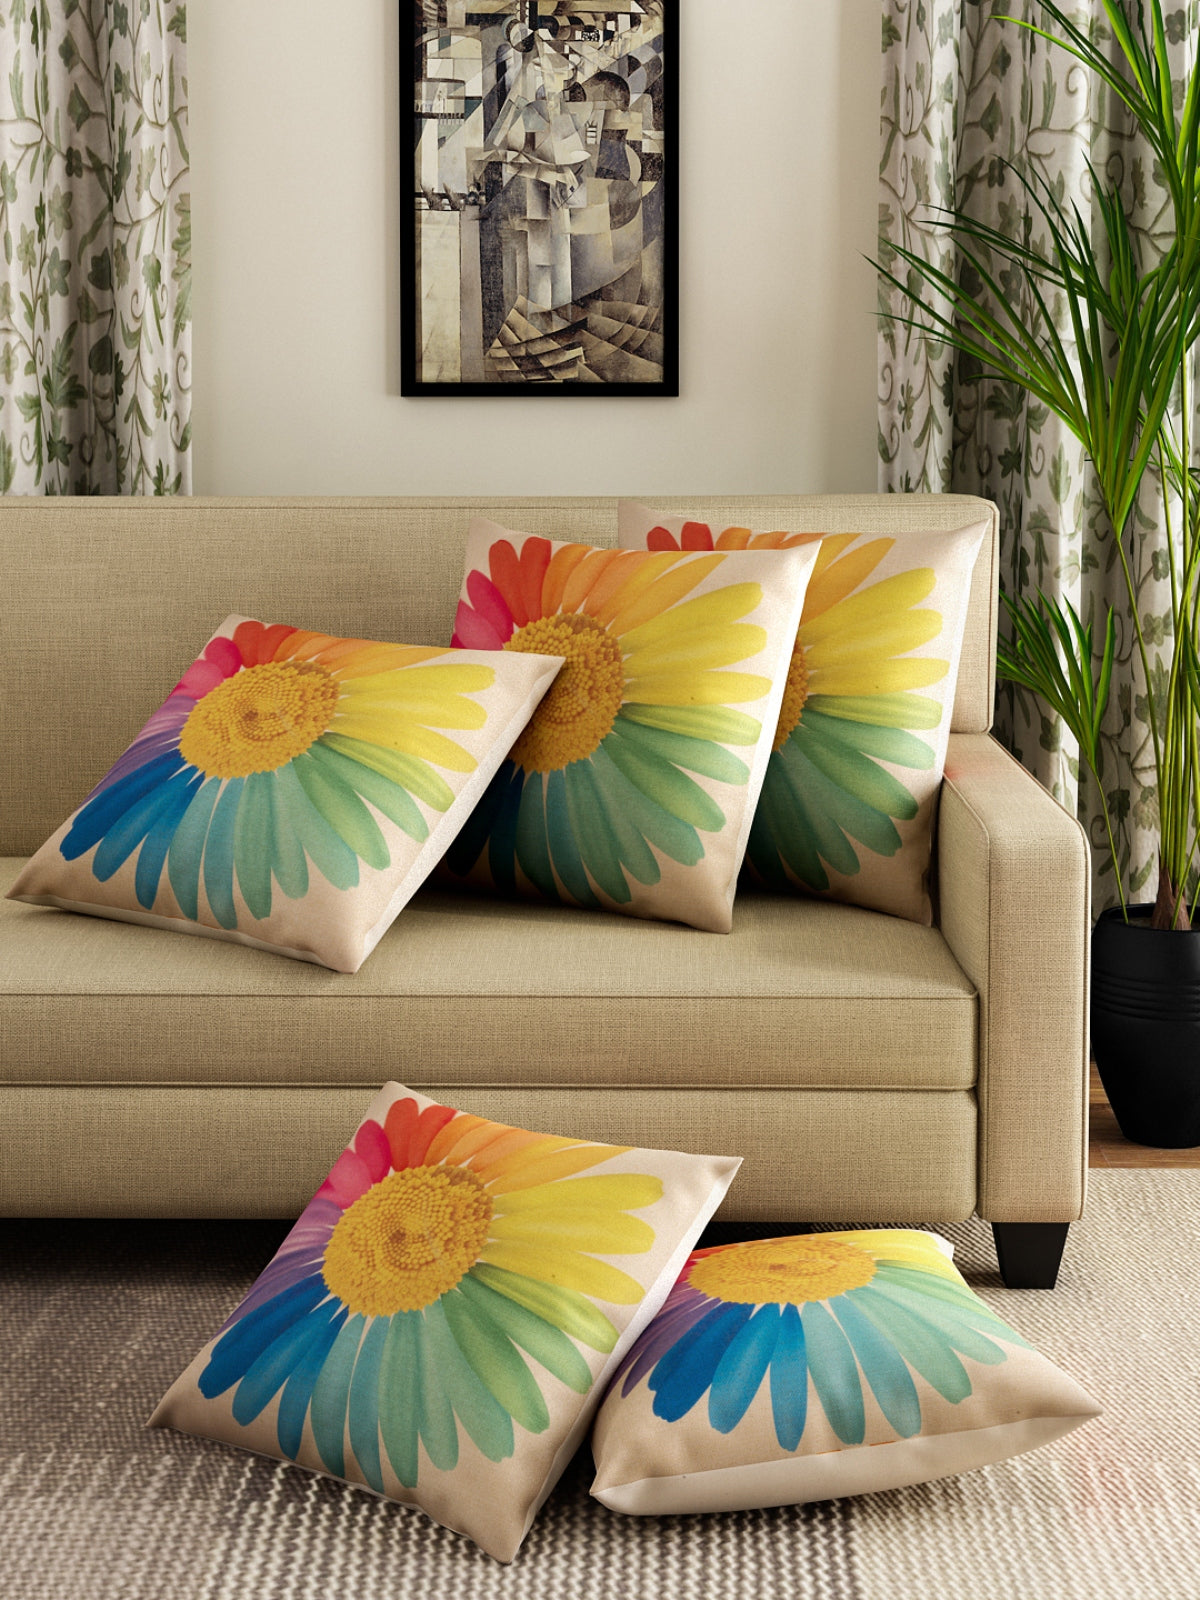 Soft Jute California Floral Printed Cushion Covers 16x16, Set of 5 - Multicolor